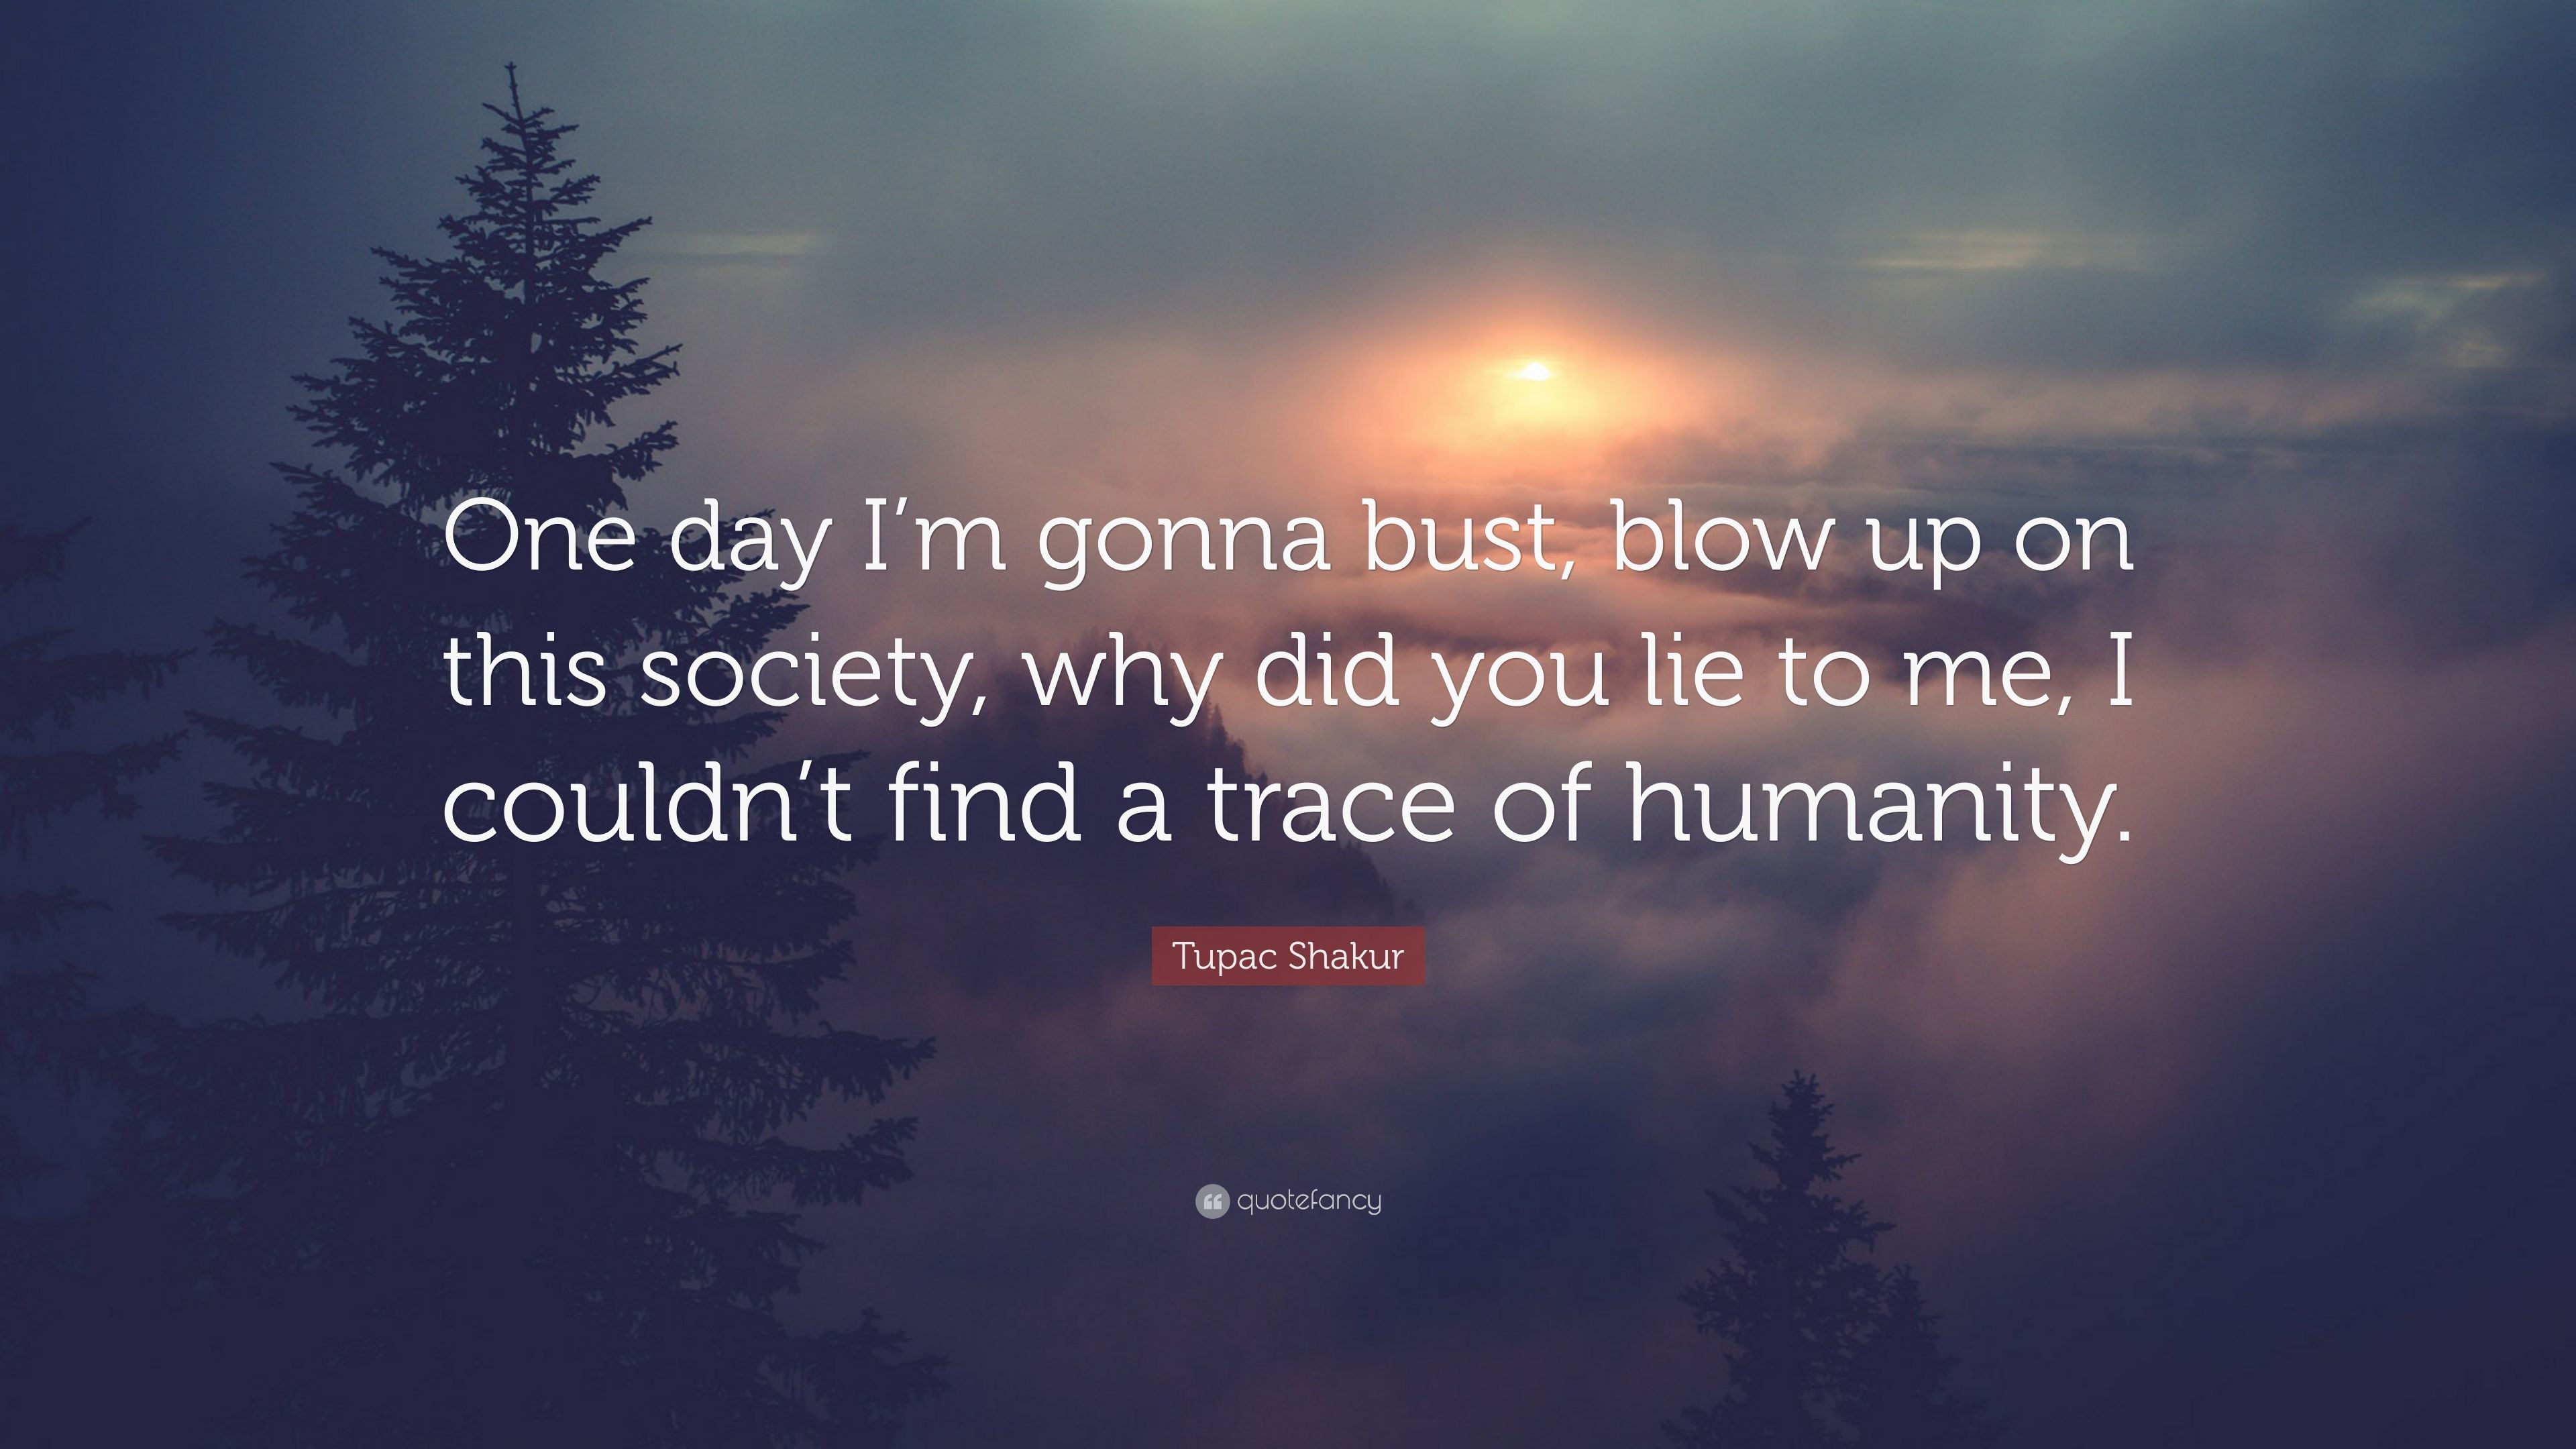 Tupac Shakur Quote: “One day I'm gonna bust, blow up on this society, why did